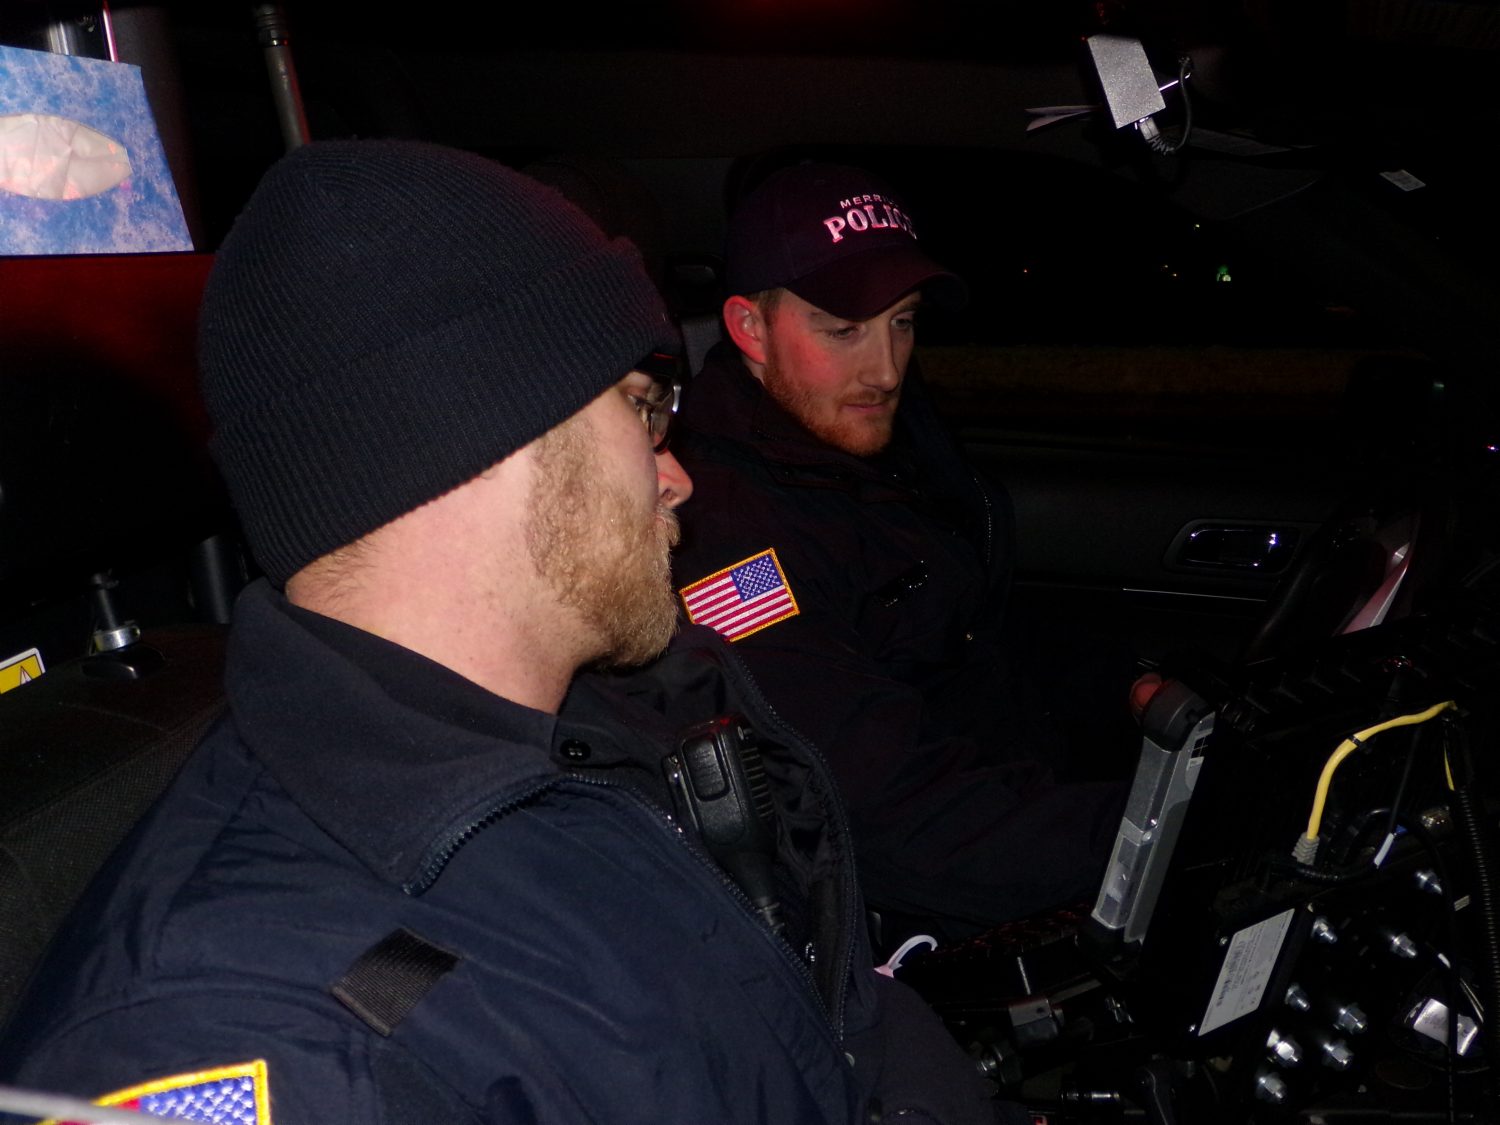 New officers hit the road: A first-hand look at the Merrill Police Deparment’s Field Training Program